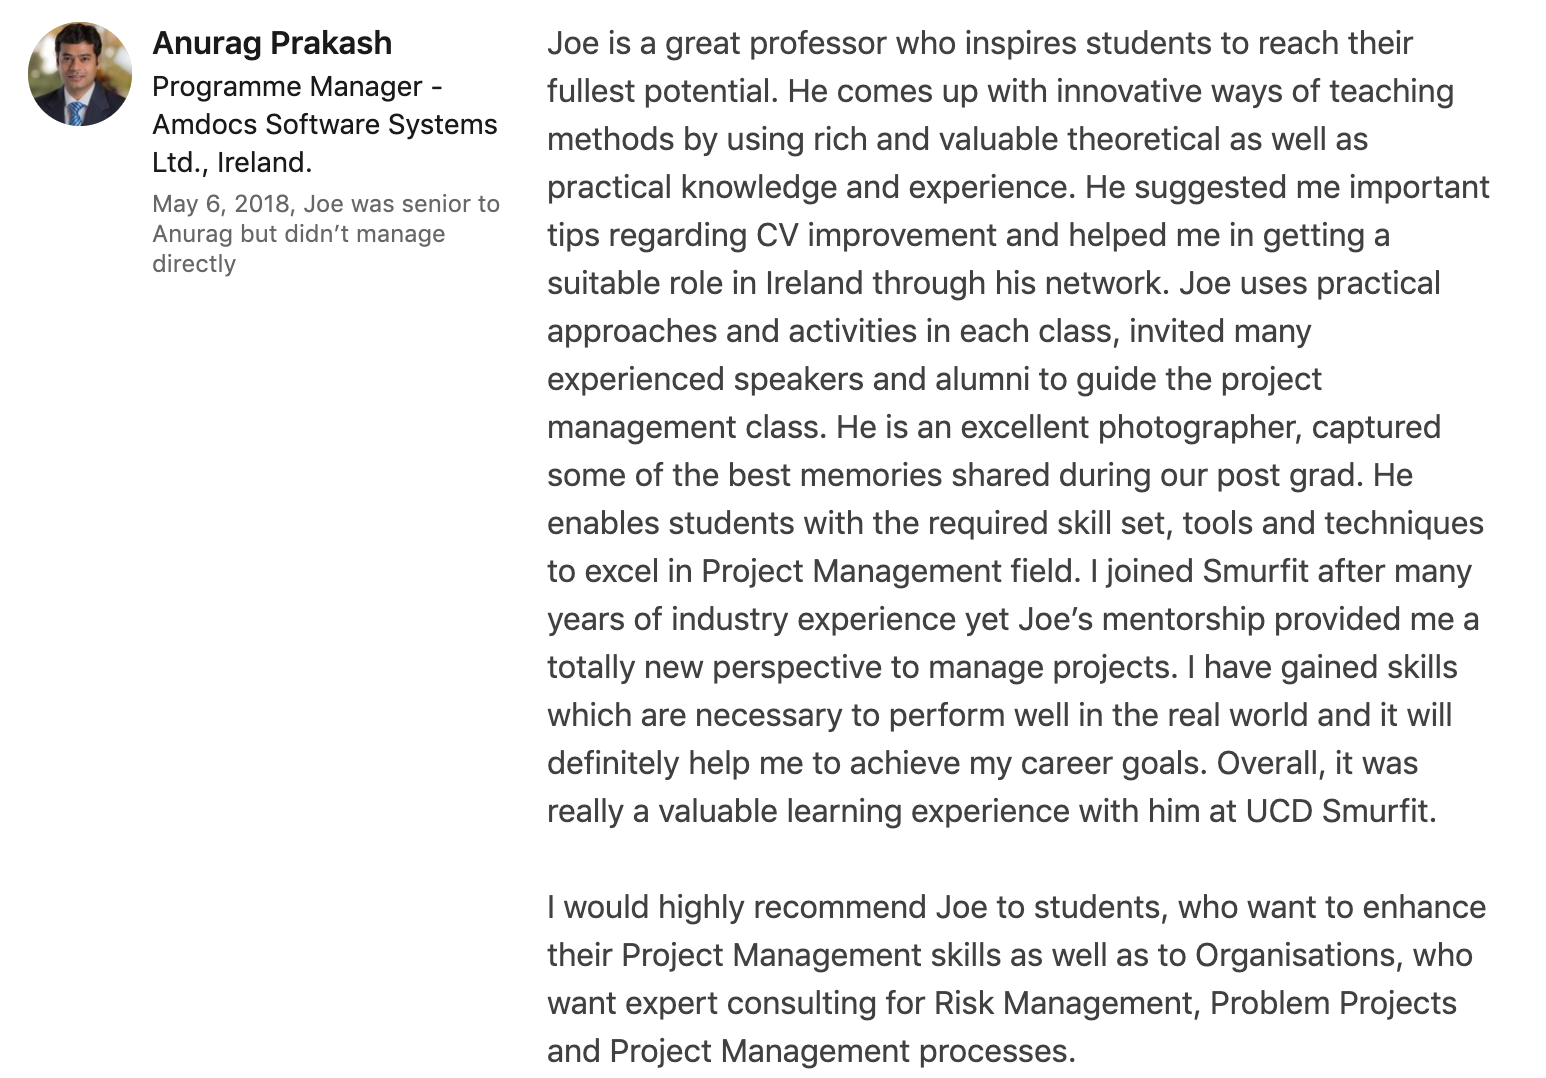 Testimonial - Anurag re teaching and consulting